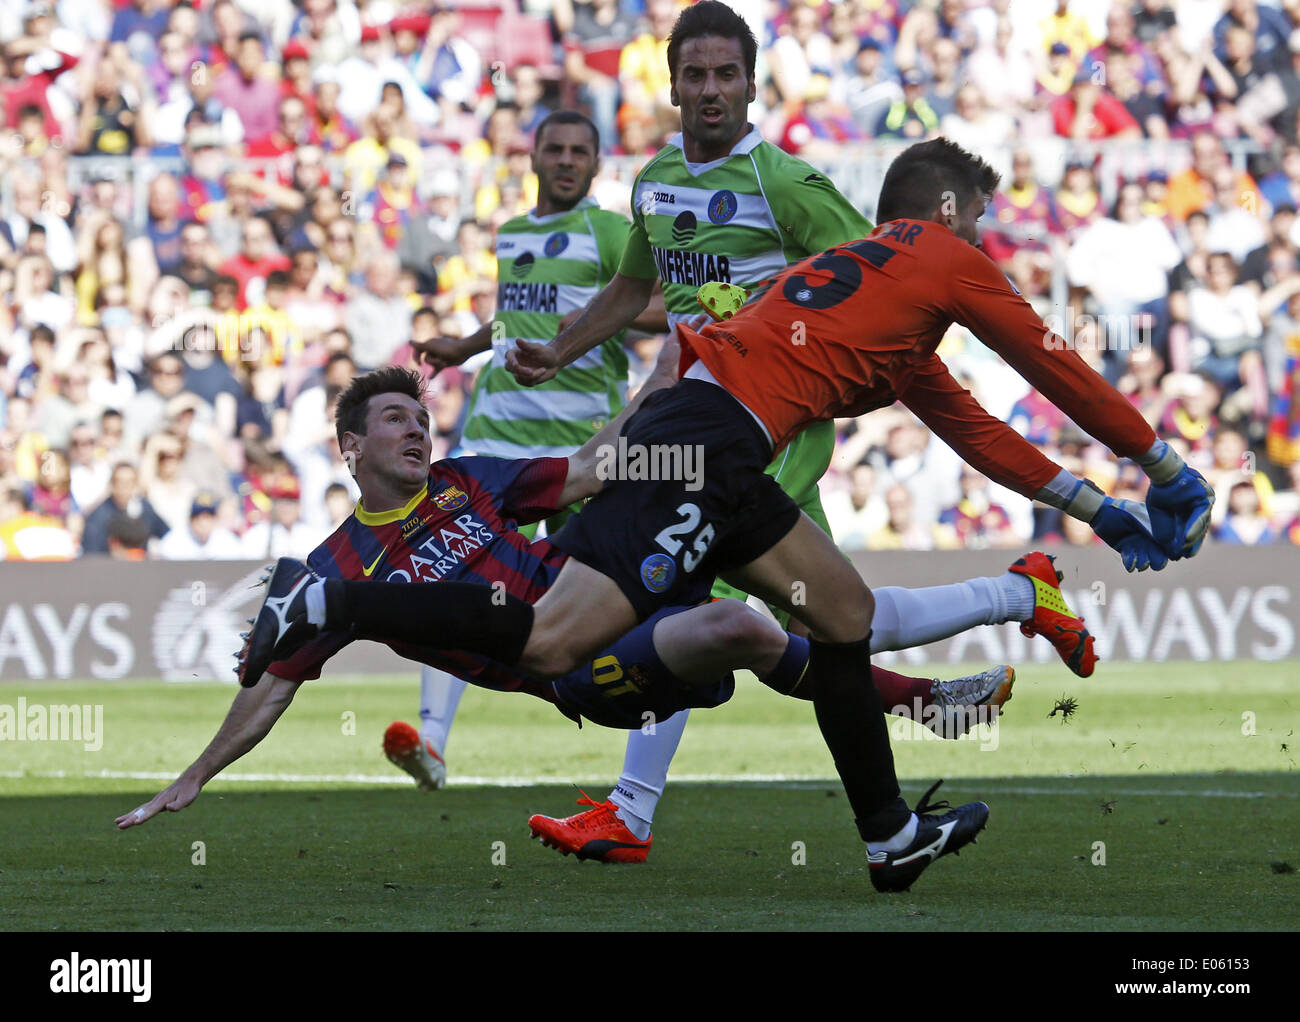 Barcelona, Spain. May 3, 2014 - Leo Messi and Julio Cesar in the match between FC Barcelona and Getafe, for Week 36 of the spanish Liga BBVA played at the Camp Nou, May 3, 2014. Photo: Joan Valls/Urbanandsport/Nurphoto. (Credit Image: Credit:  Joan Valls/NurPhoto/ZUMAPRESS.com/Alamy Live News) Stock Photo